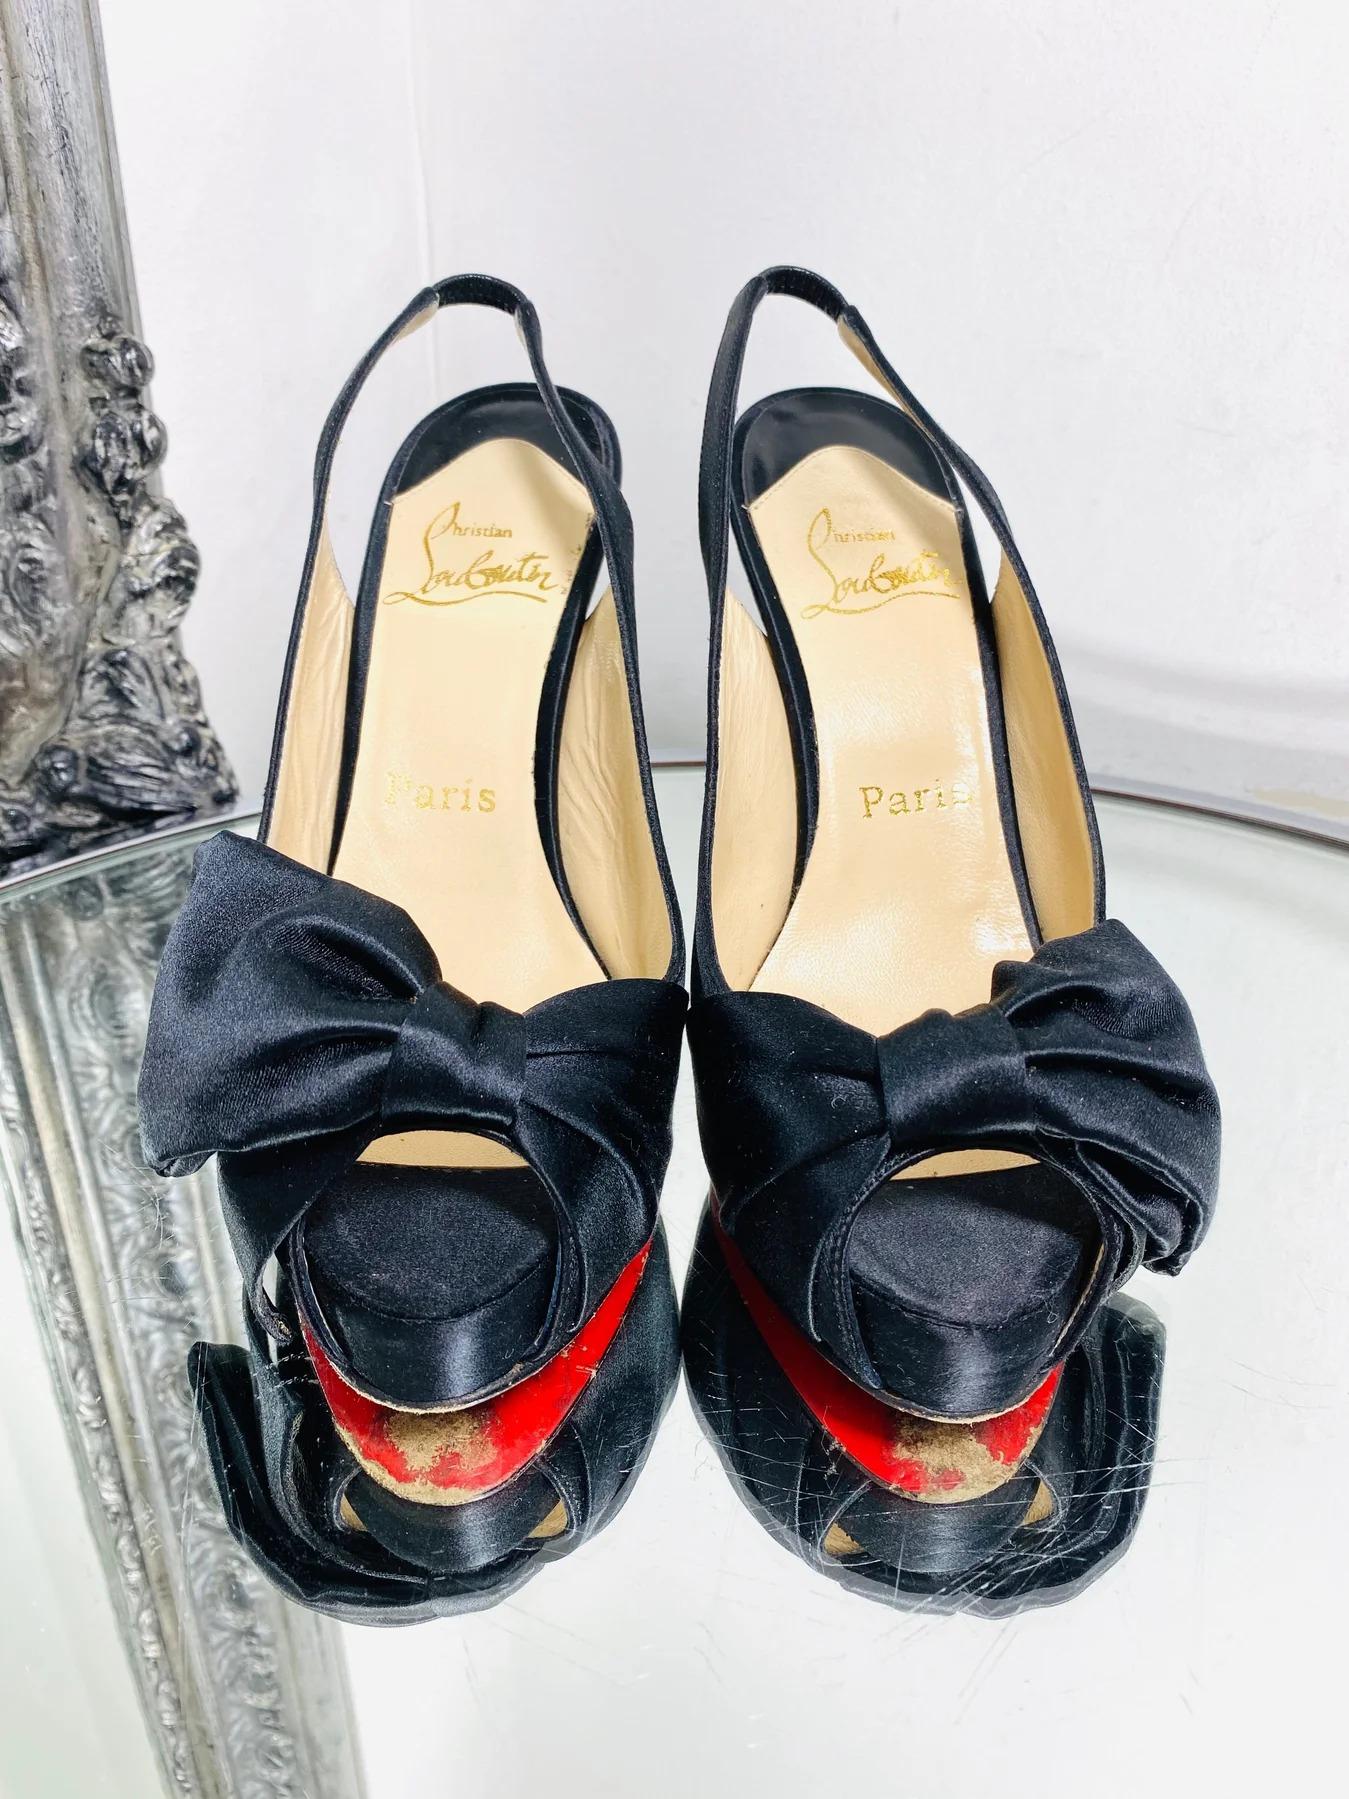 Christian Louboutin Vendome 100 Satin Pumps

Featuring sling-back, platform and peep toe. Designed with oversized bow and 12cm stiletto heel. Iconic 'Louboutin' red soles

Additional information:
Size – 37
Composition – Satin
Condition – Good (Signs